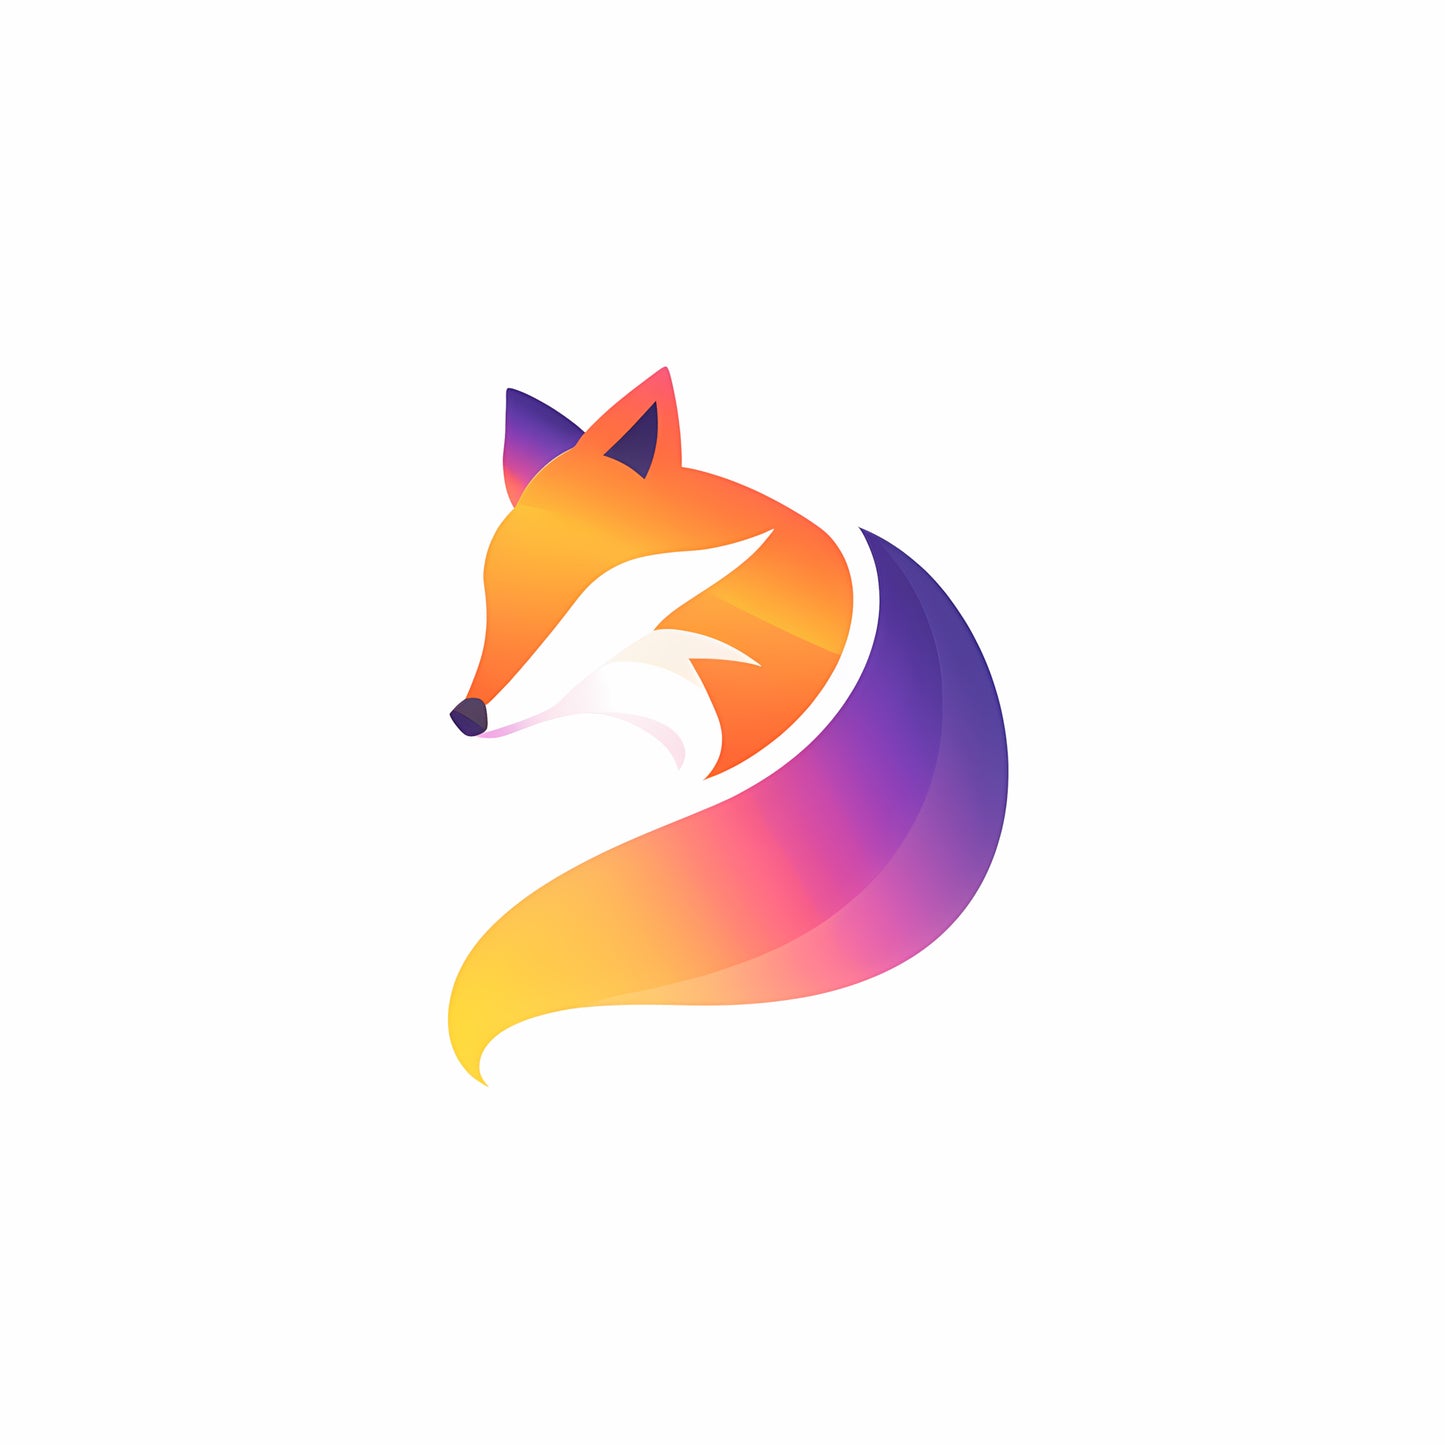 Get a Custom PNG/SVG Vector Fox Logo Design for Your Business/Brand